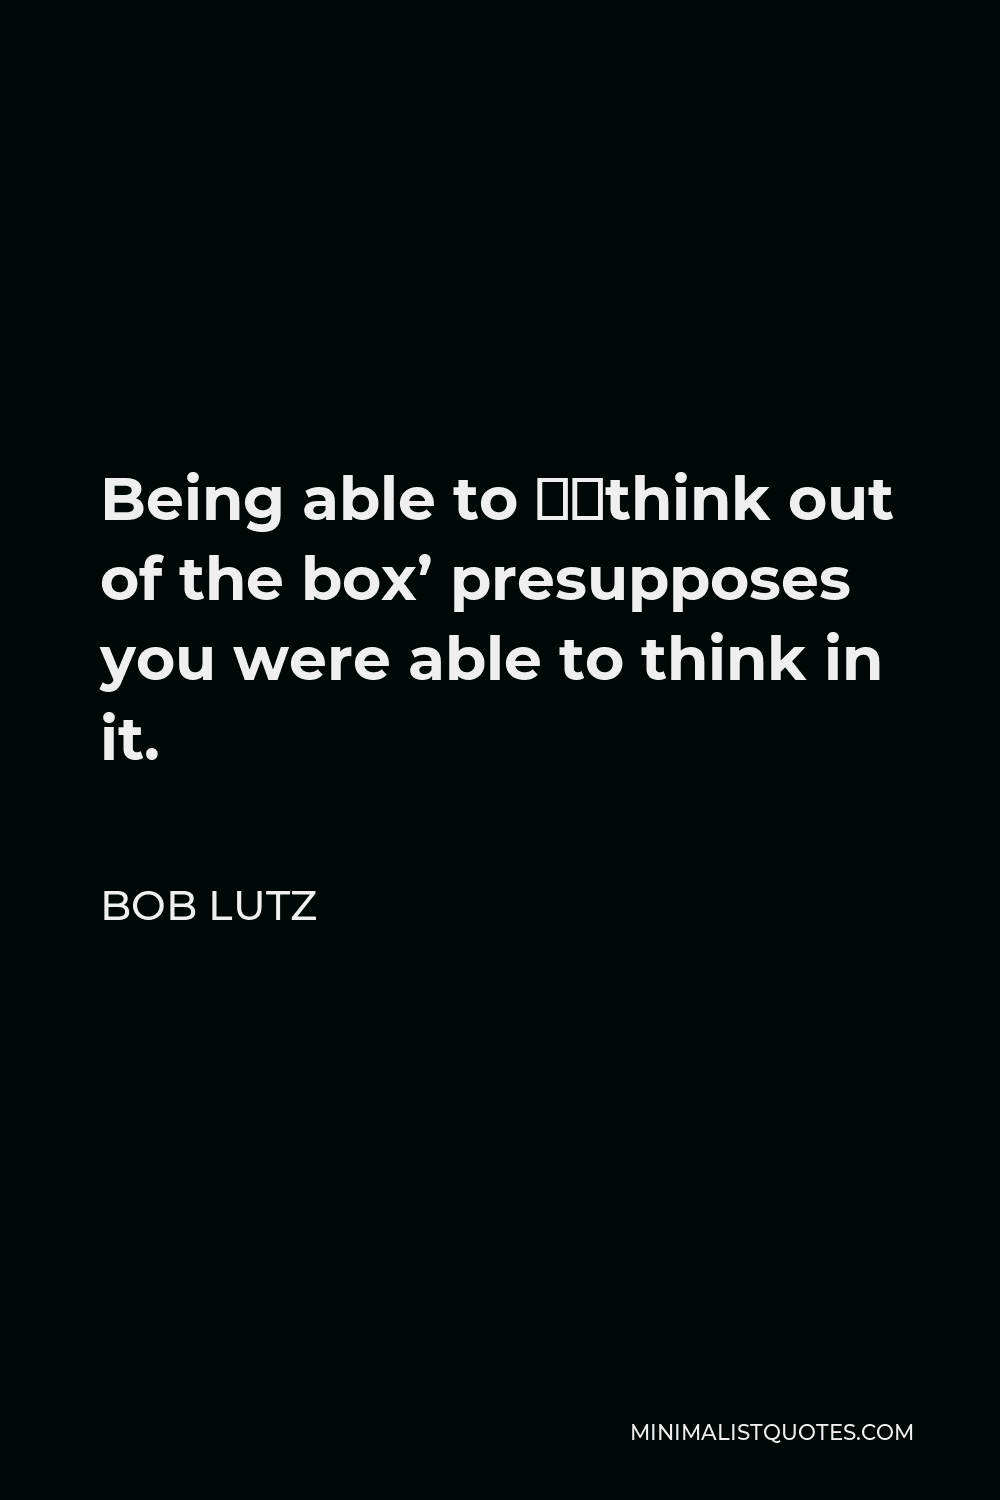 Bob Lutz Quote - Being able to ‘think out of the box’ presupposes you were able to think in it.